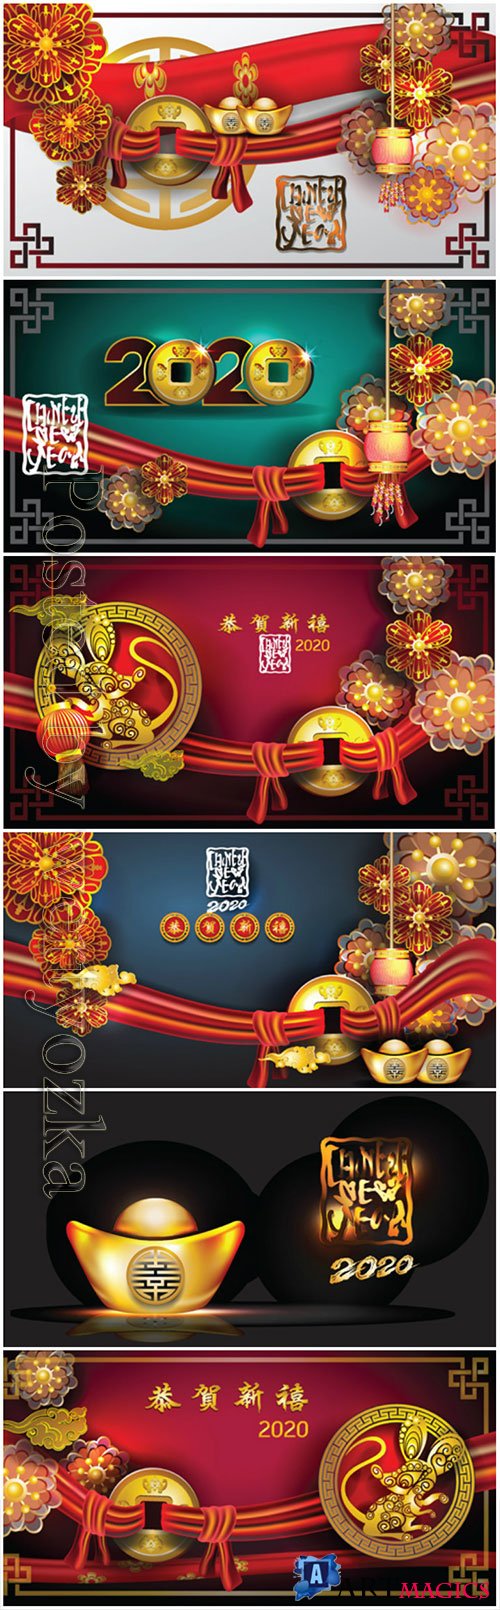 Happy chinese new year 2020, holiday vector with year of rat # 4